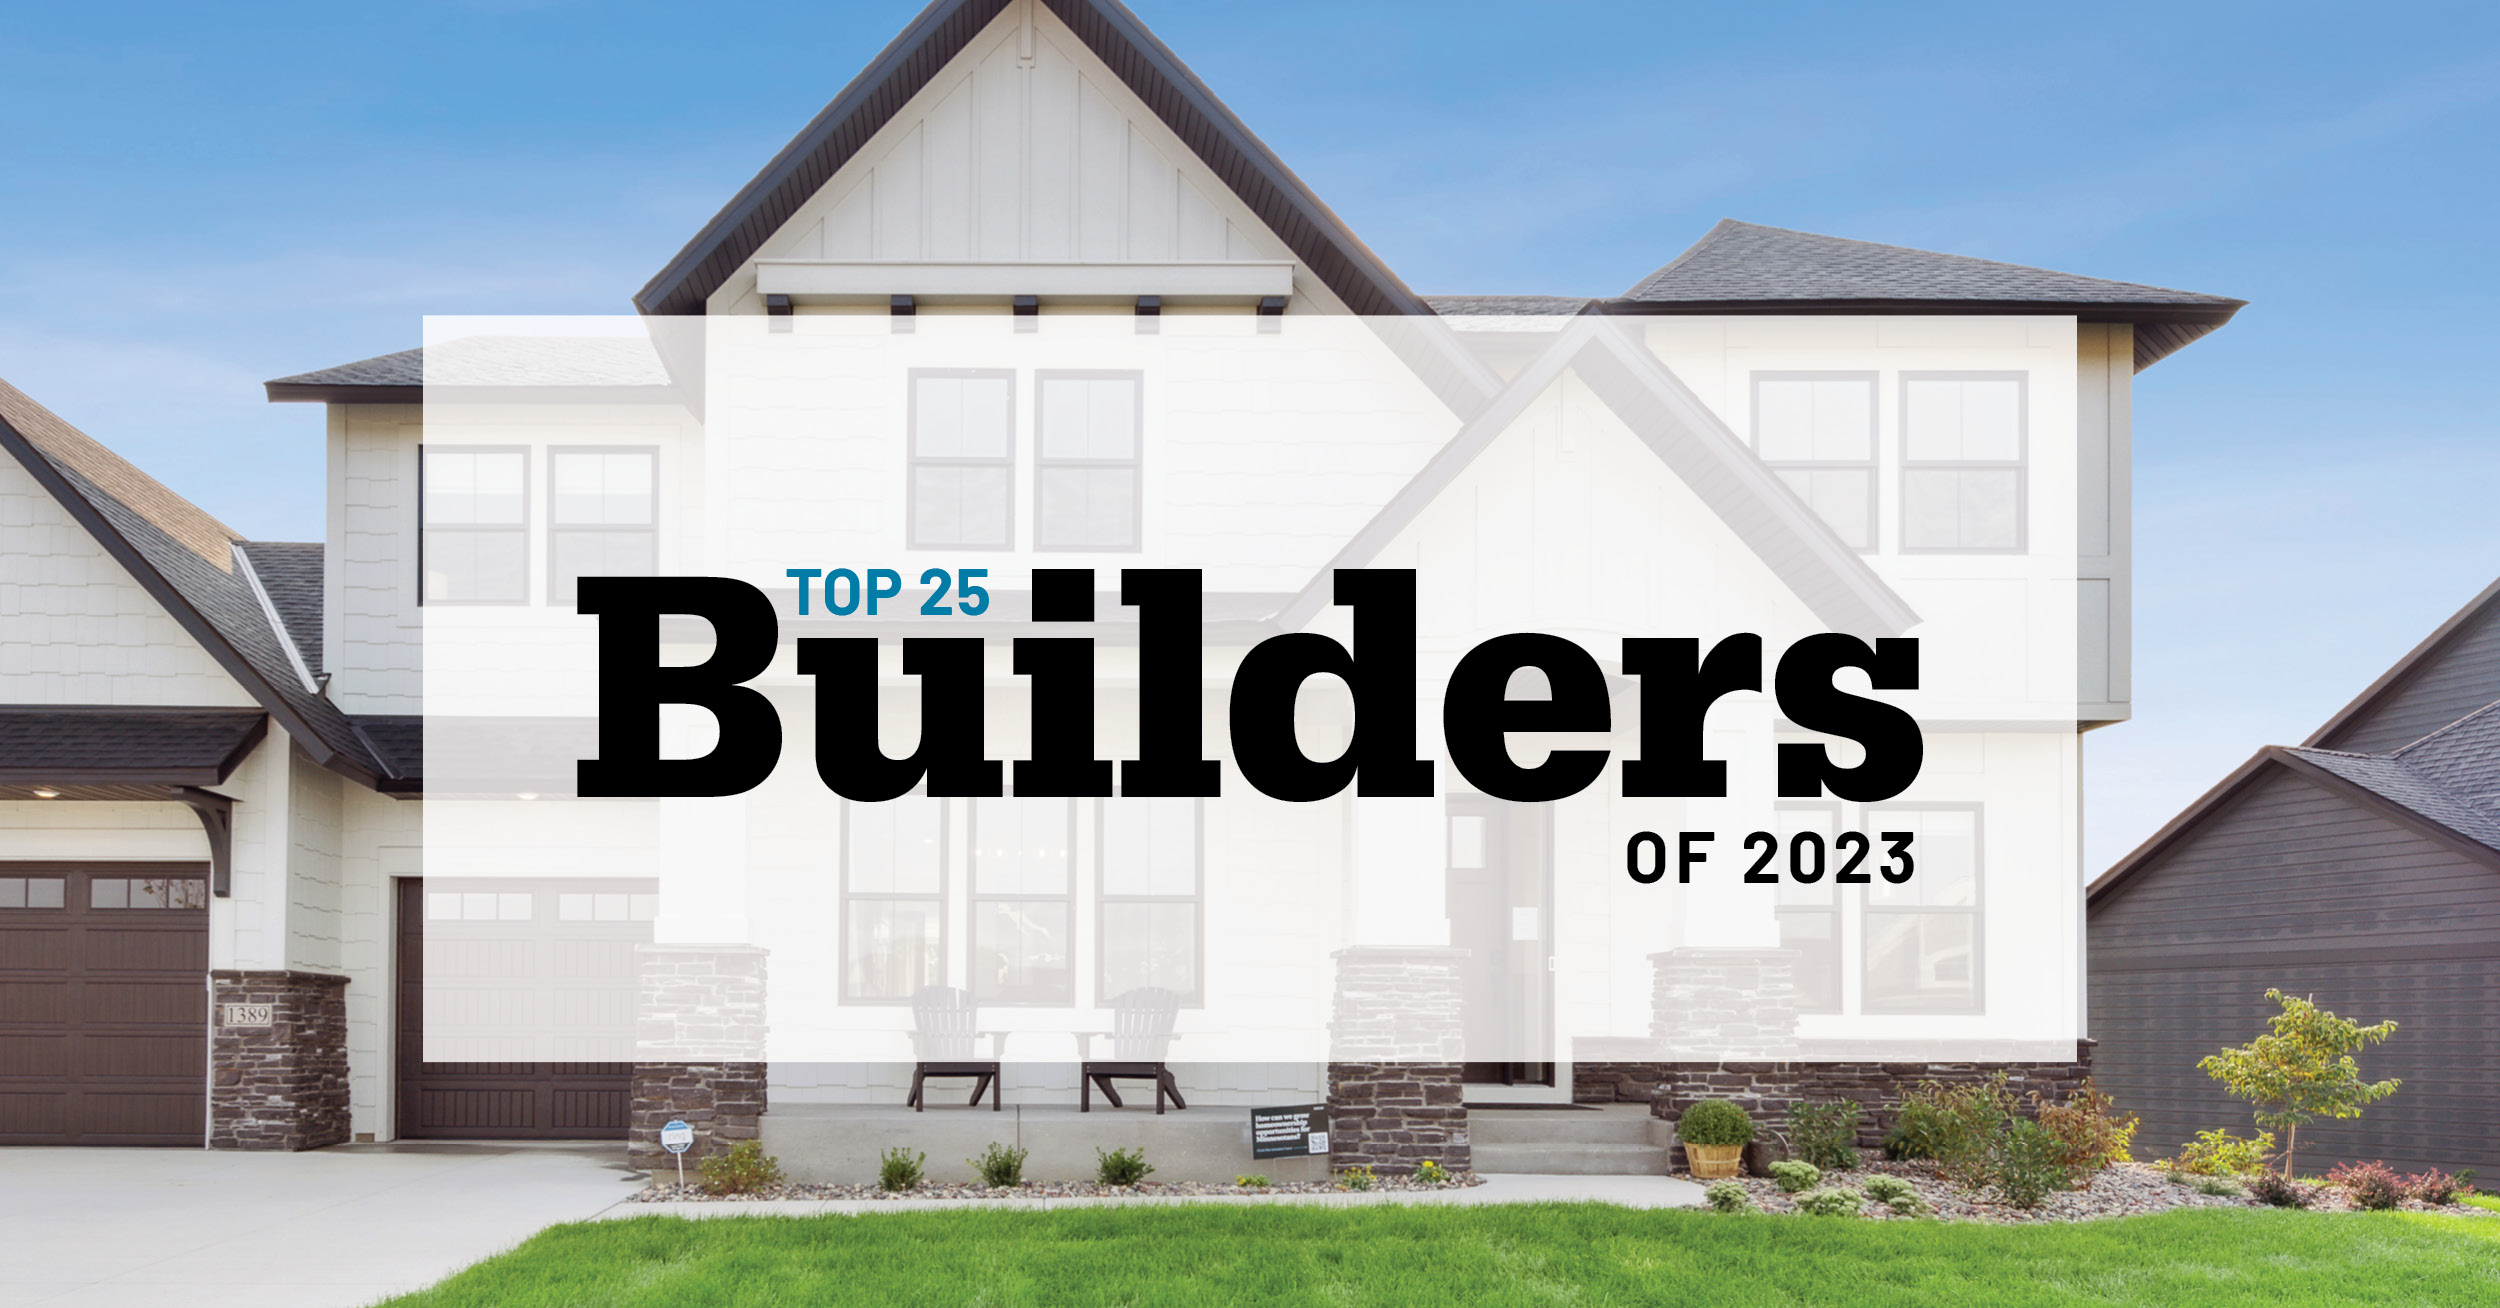 Image for The Top 25 Builders of 2023